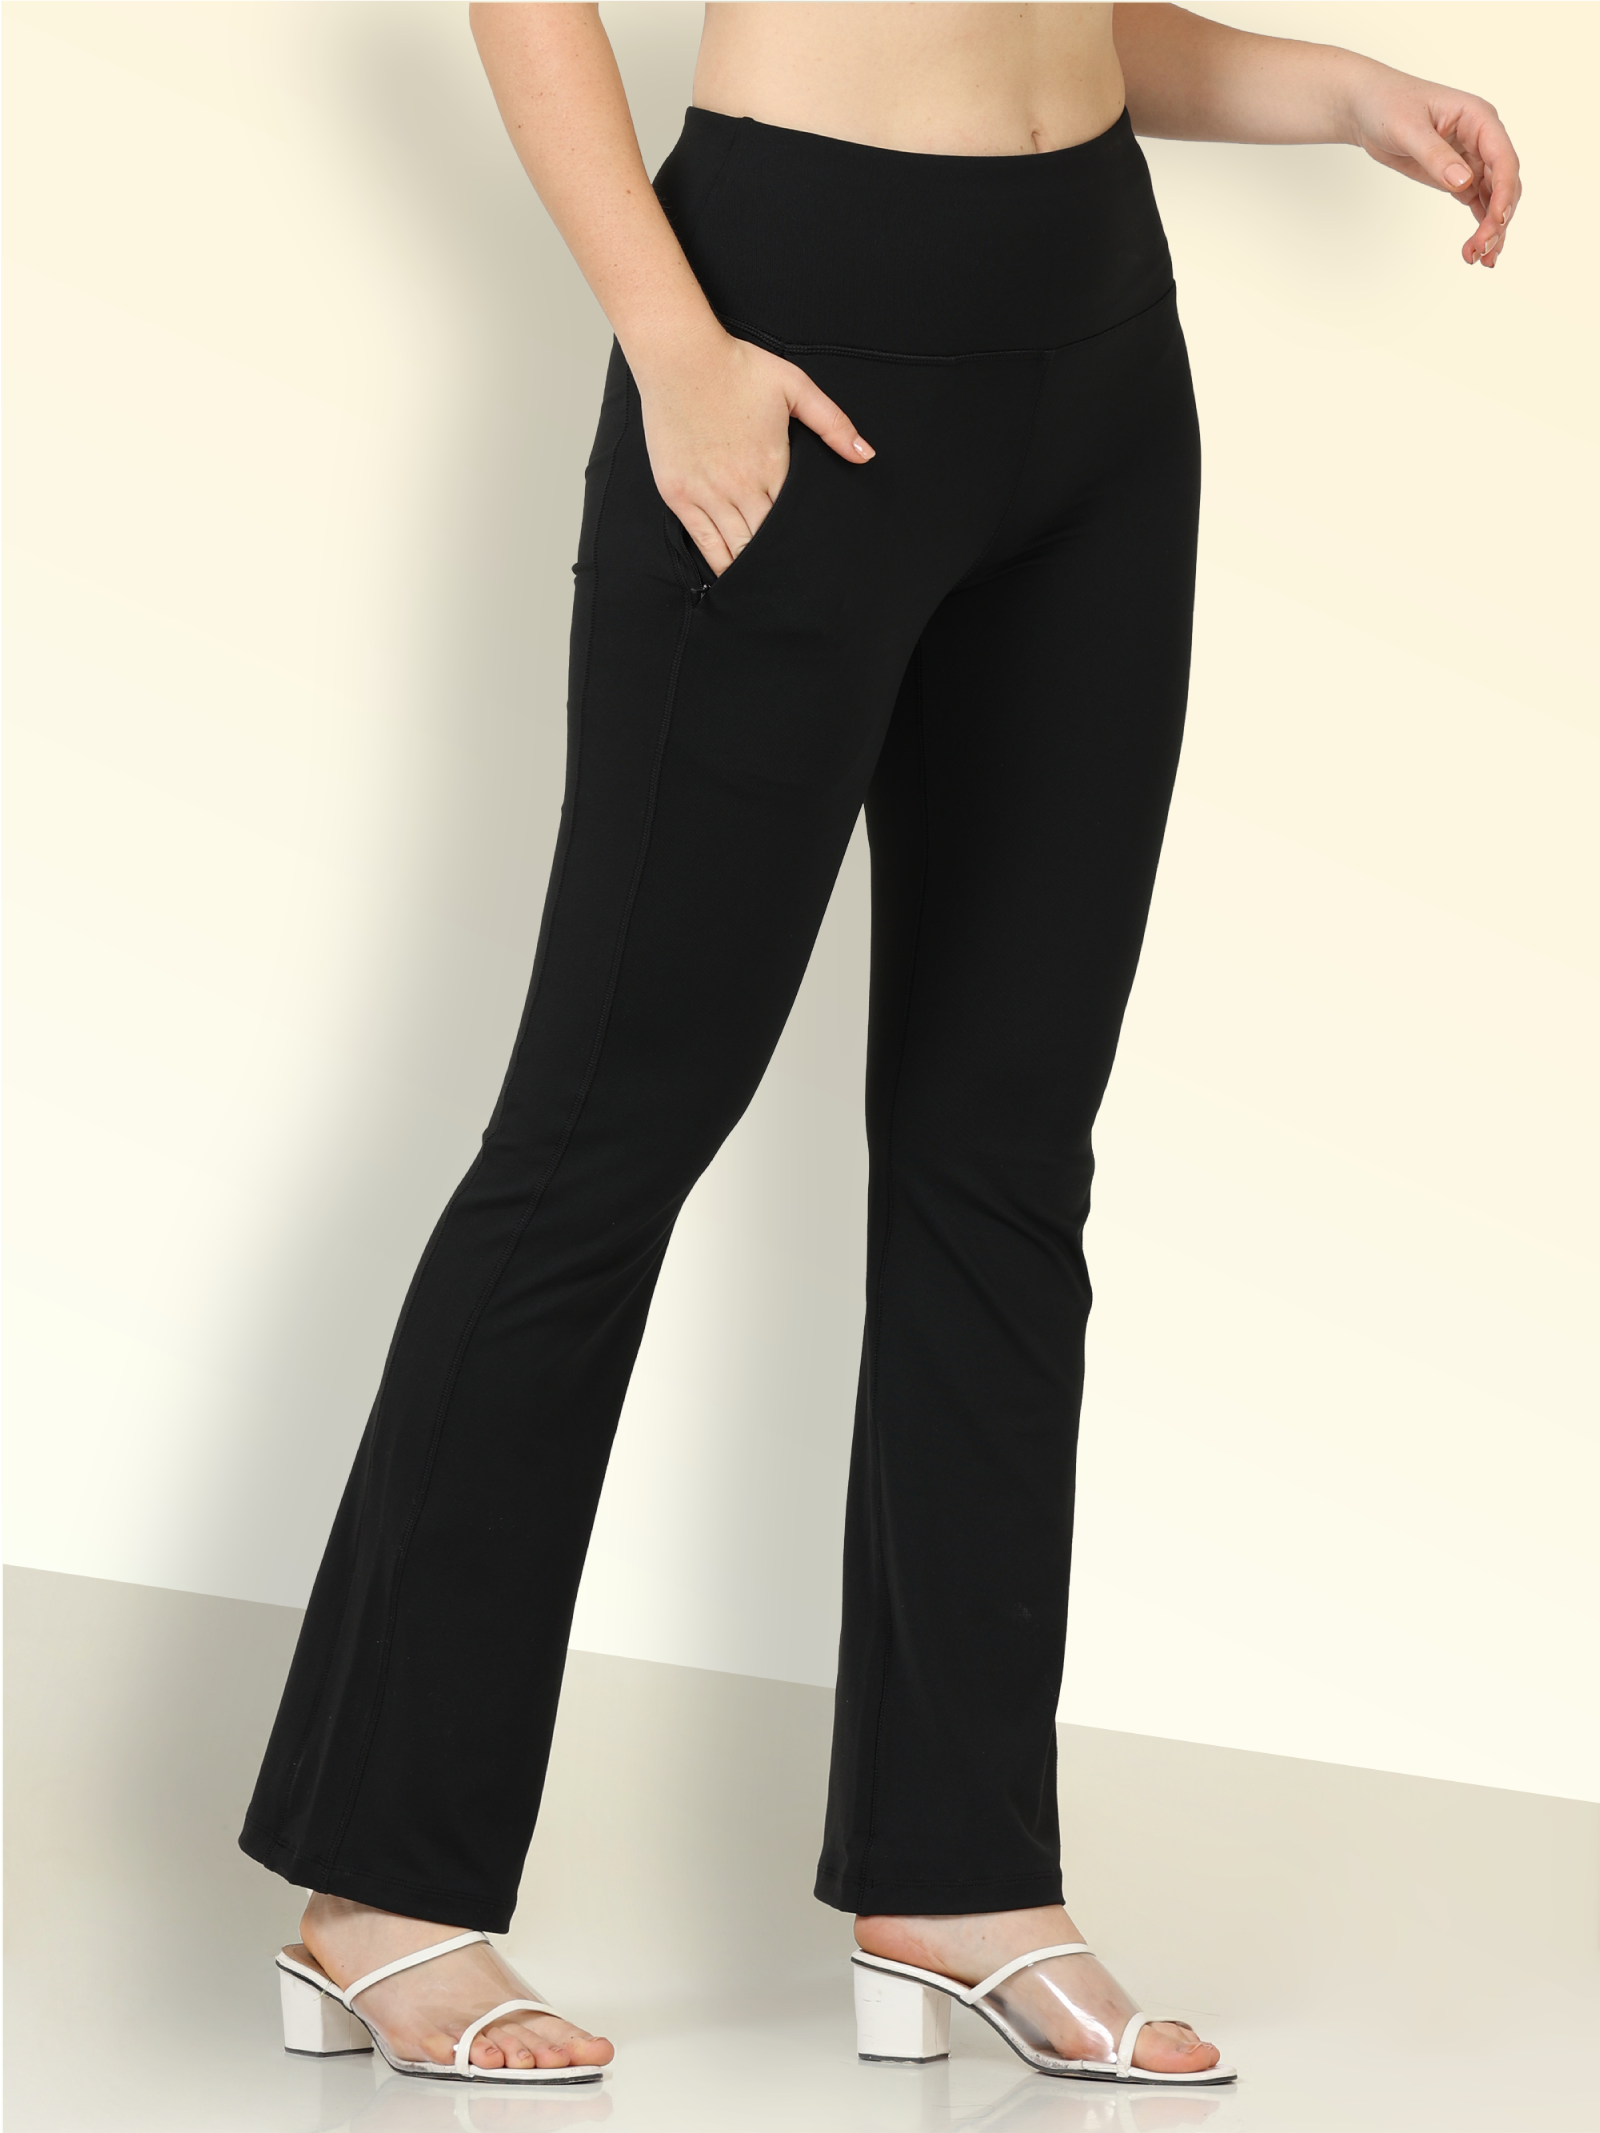 flared trousers for women - black color